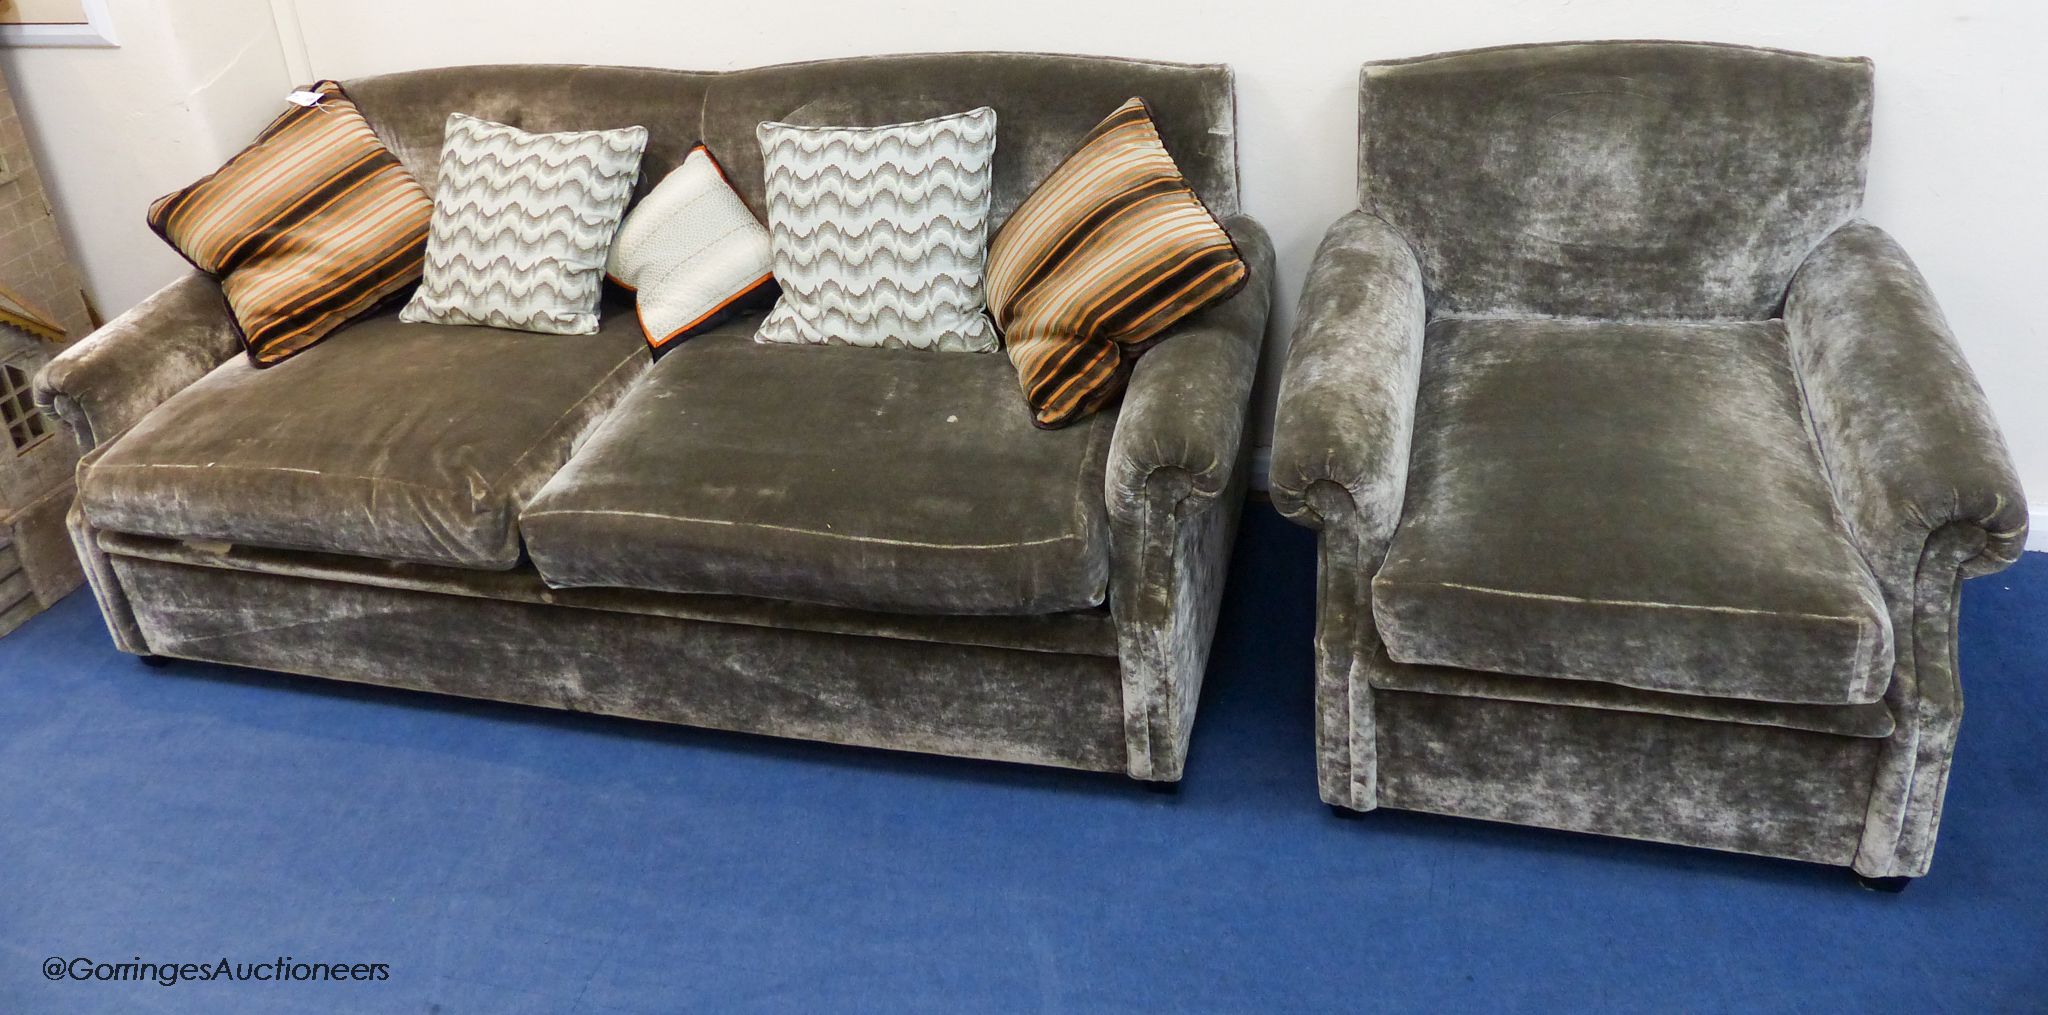 A grey velvet two seat sofa bed, approximately 191 cm wide and a matching armchair, various scatter cushions